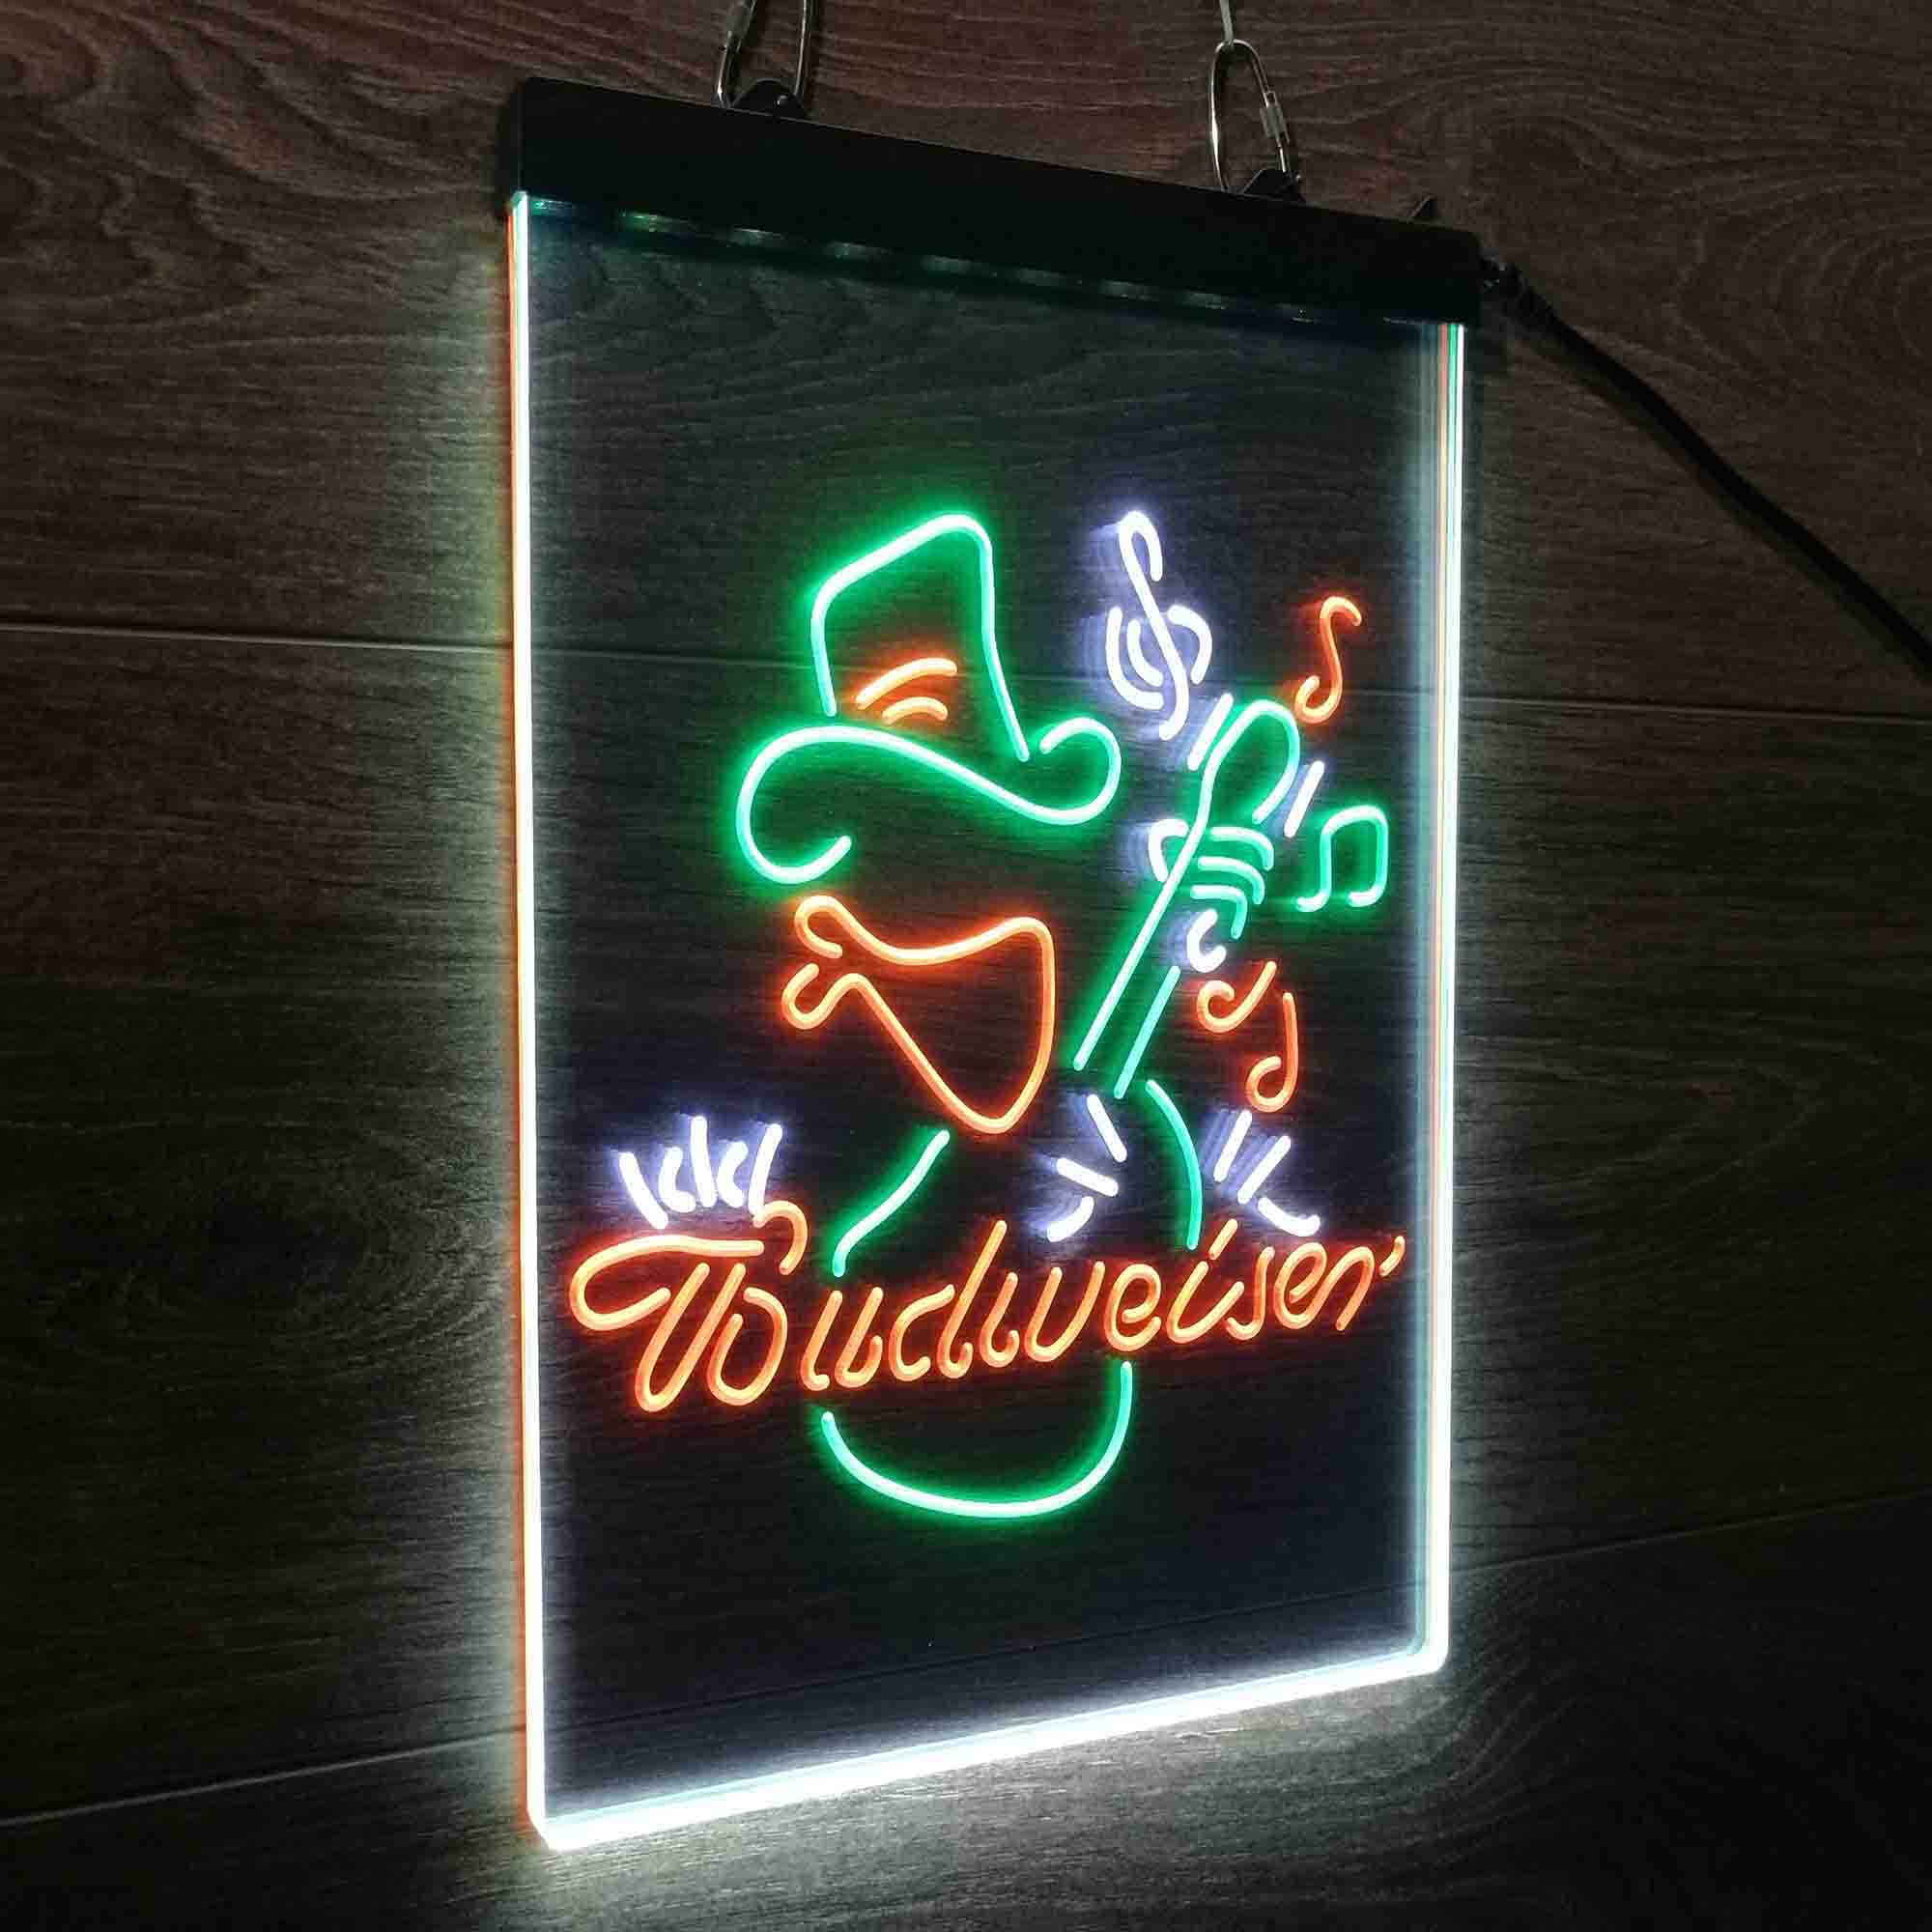 Budweiser Cowboy Play Guitar Neon LED Sign 3 Colors